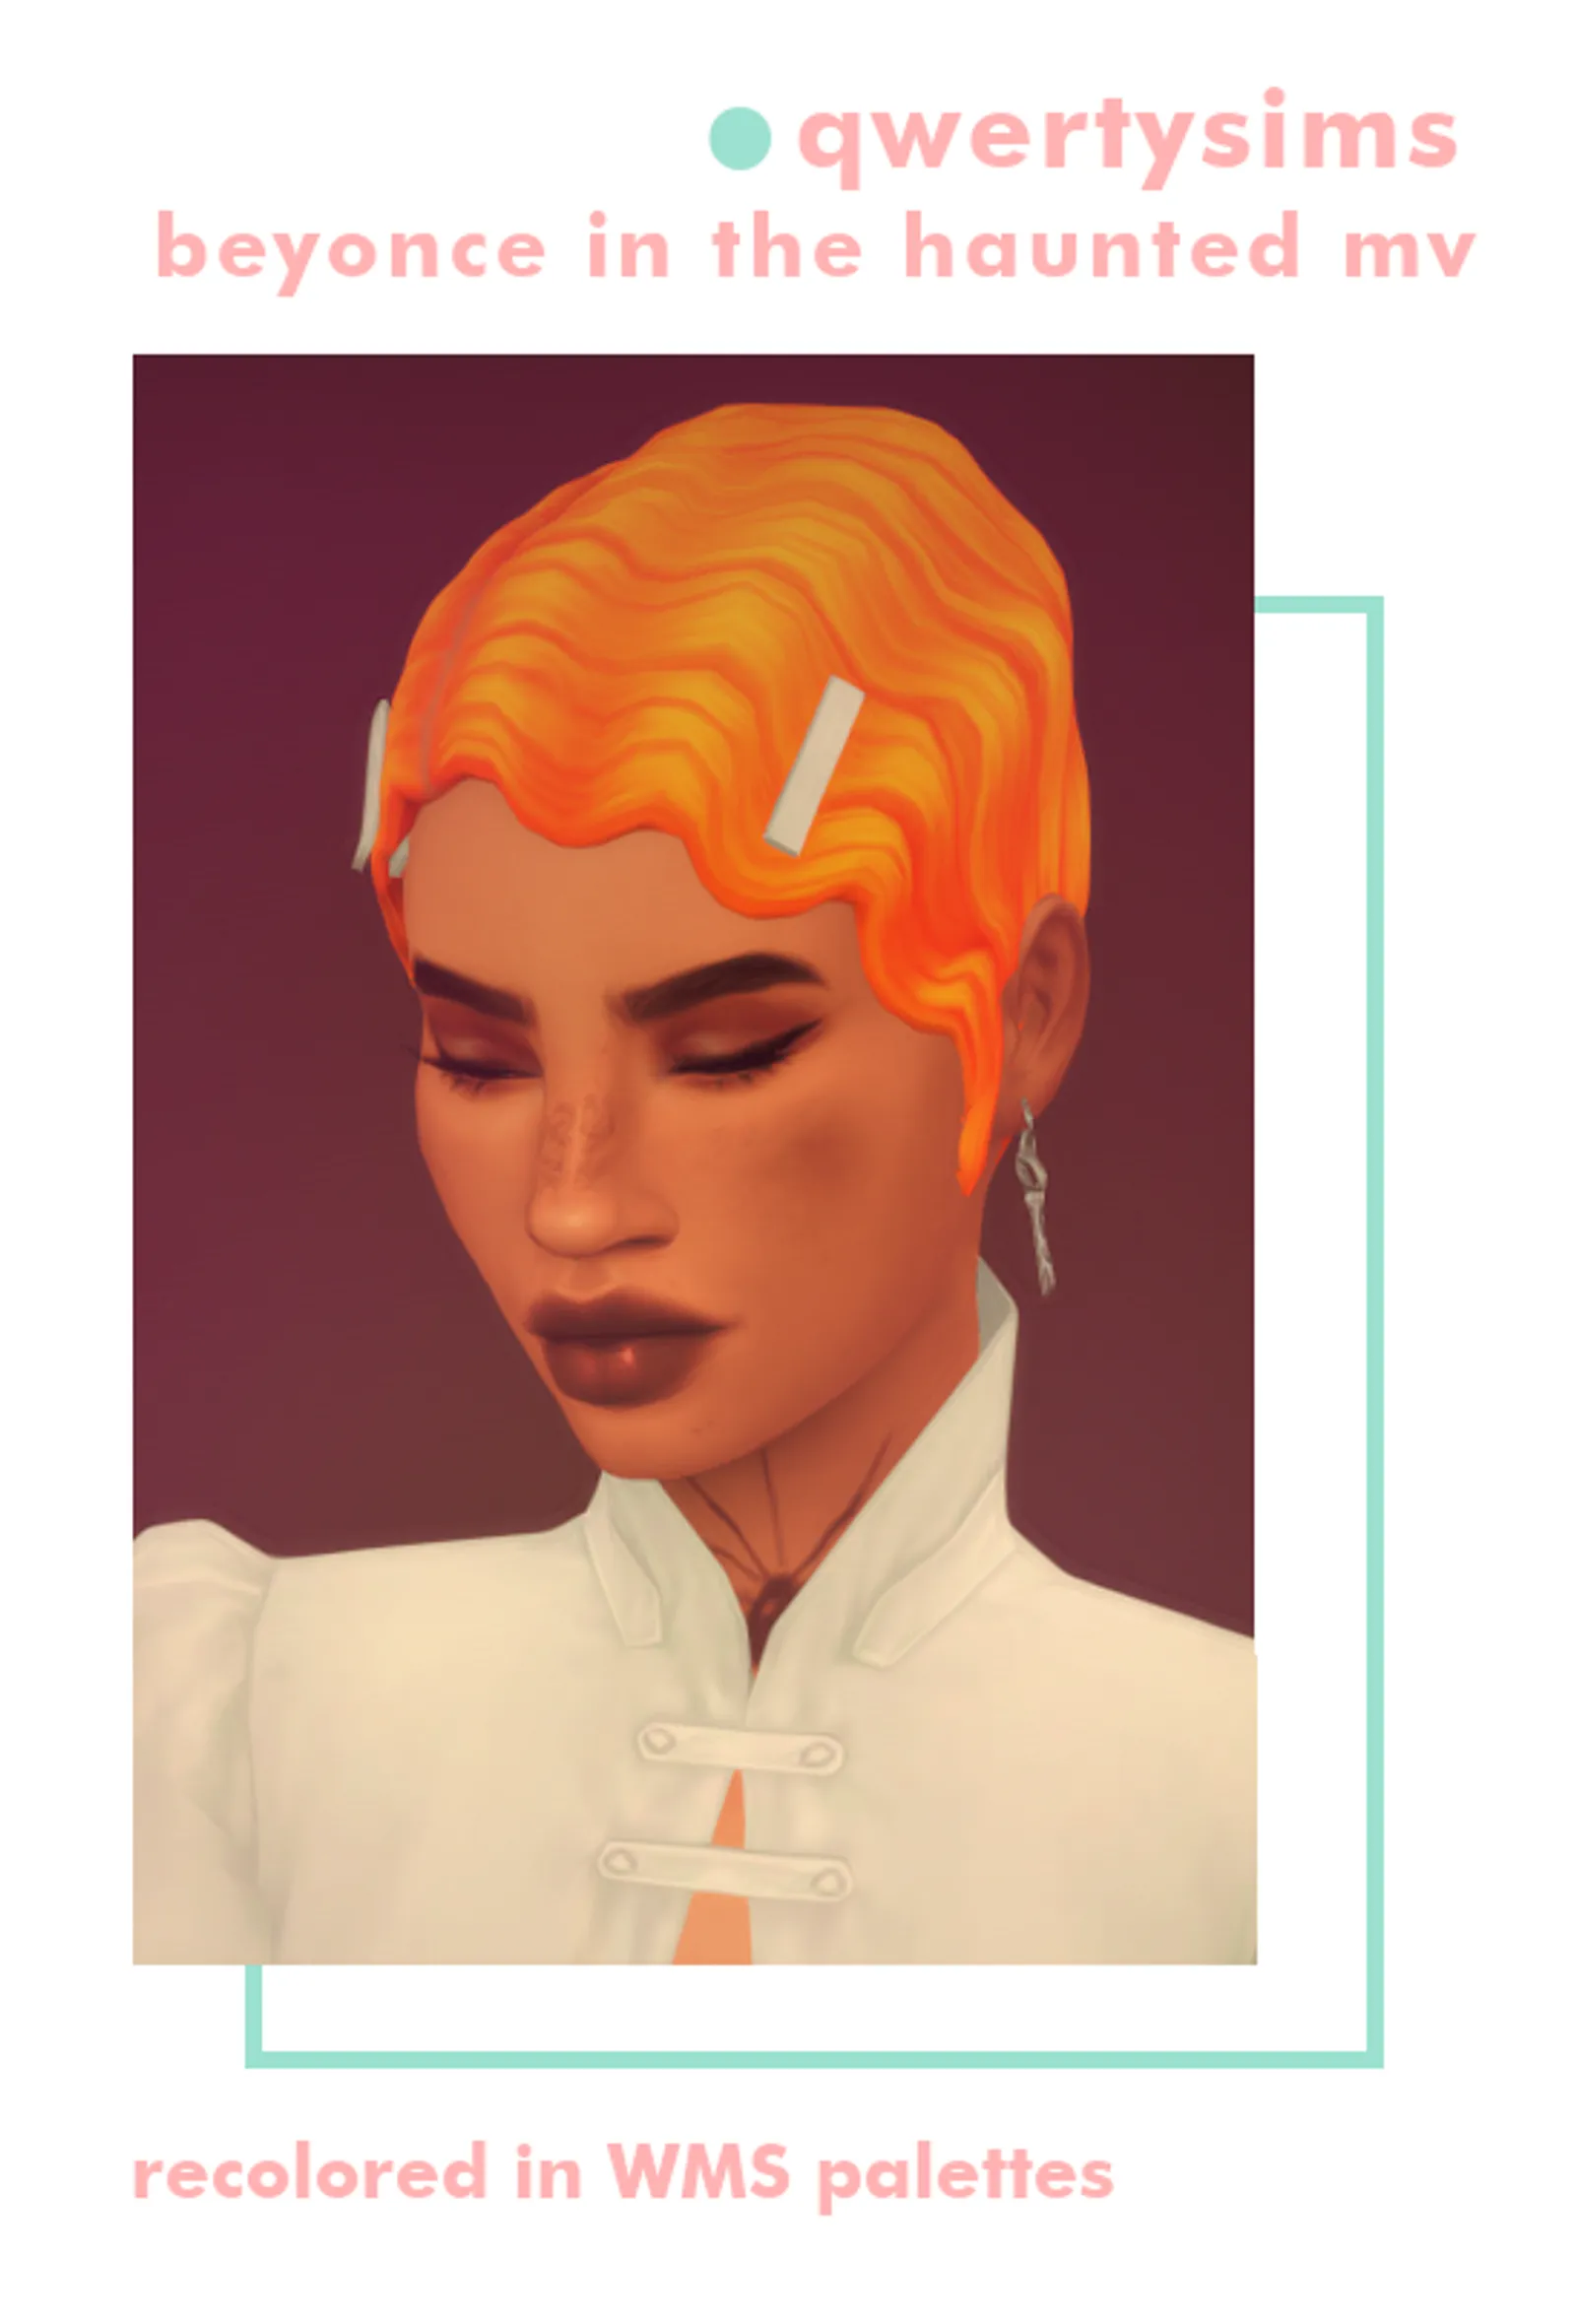 Qwertysims Beyonce in the haunted music video Recolored